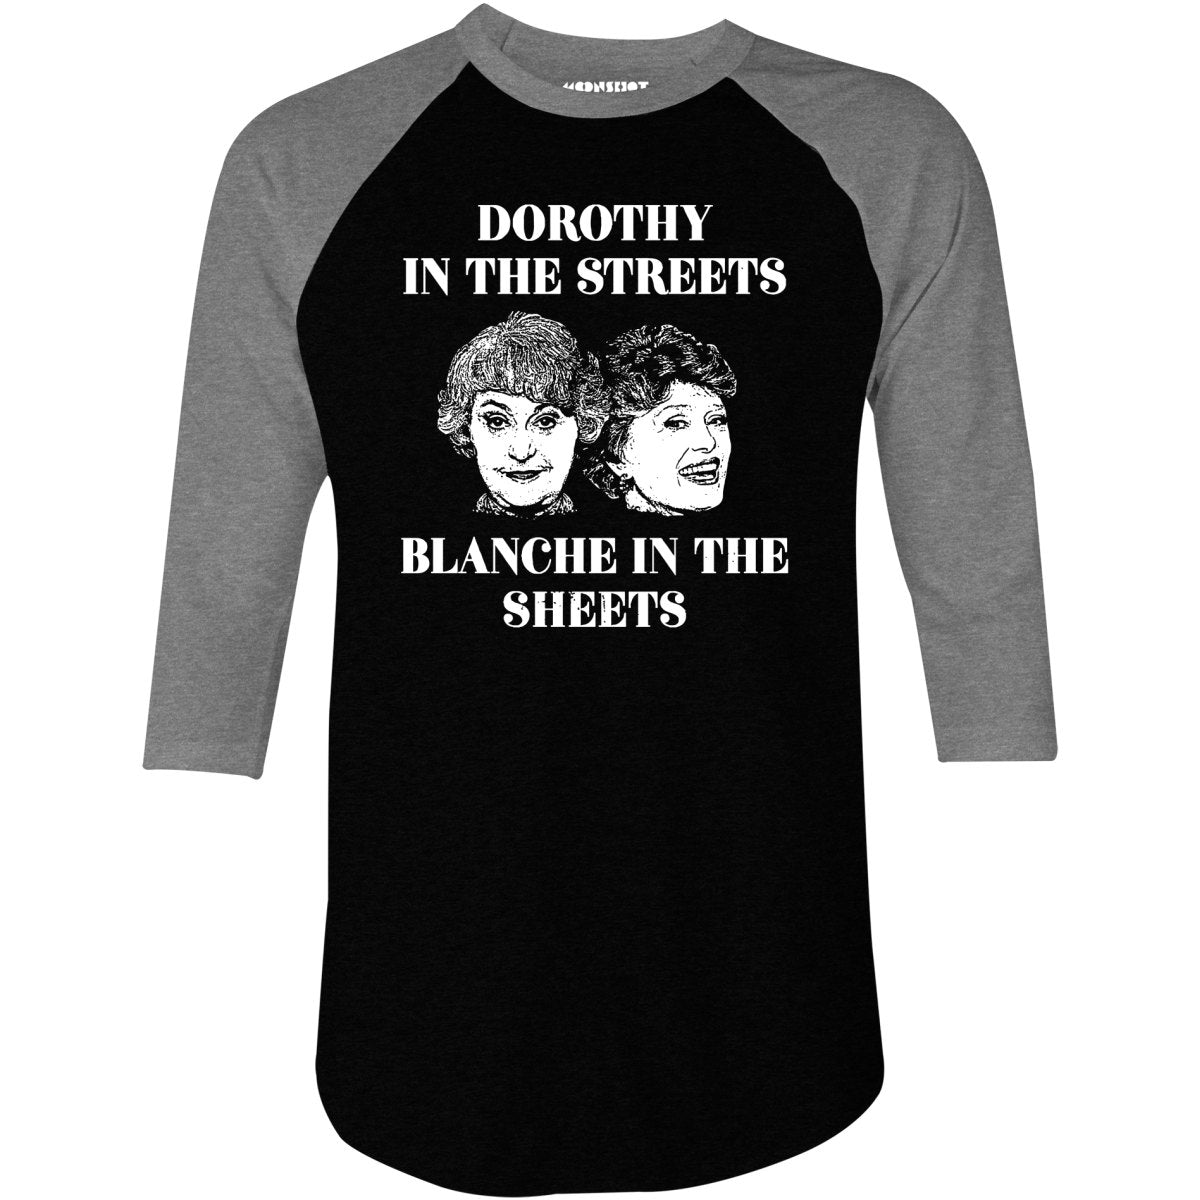 Dorothy in the Streets Blanche in the Sheets - 3/4 Sleeve Raglan T-Shirt